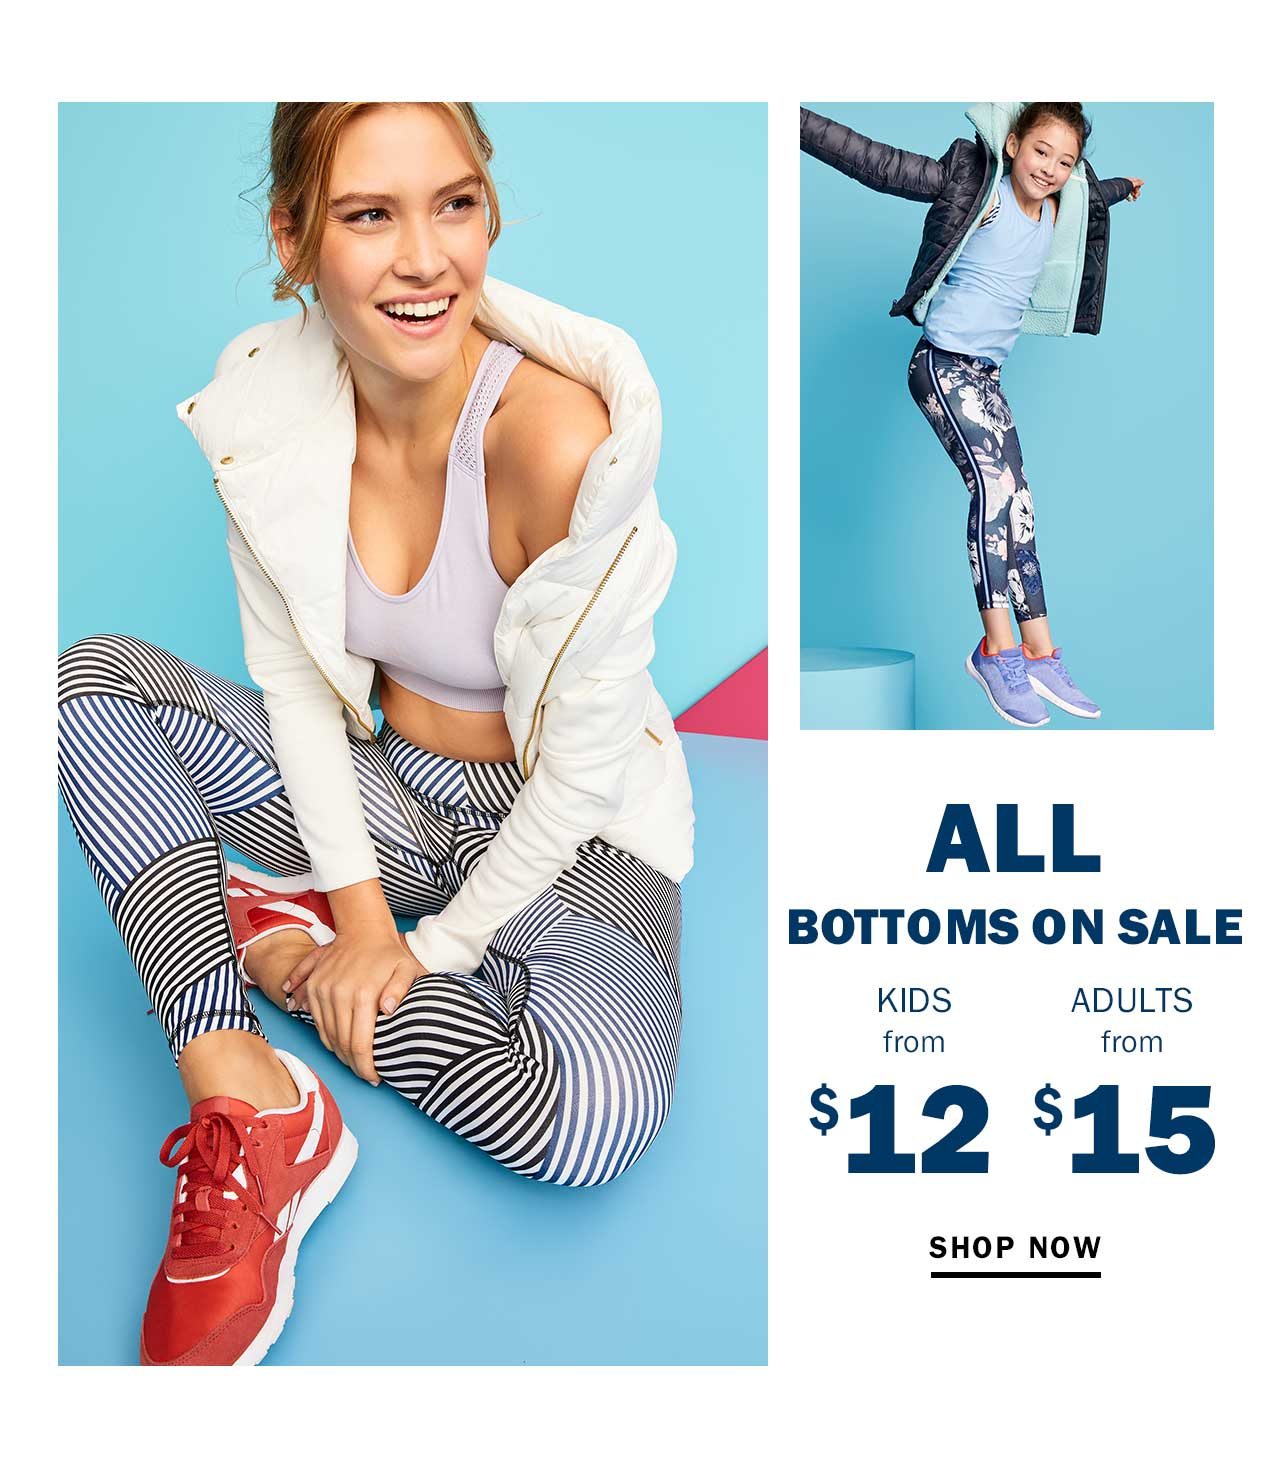 All bottoms on sale